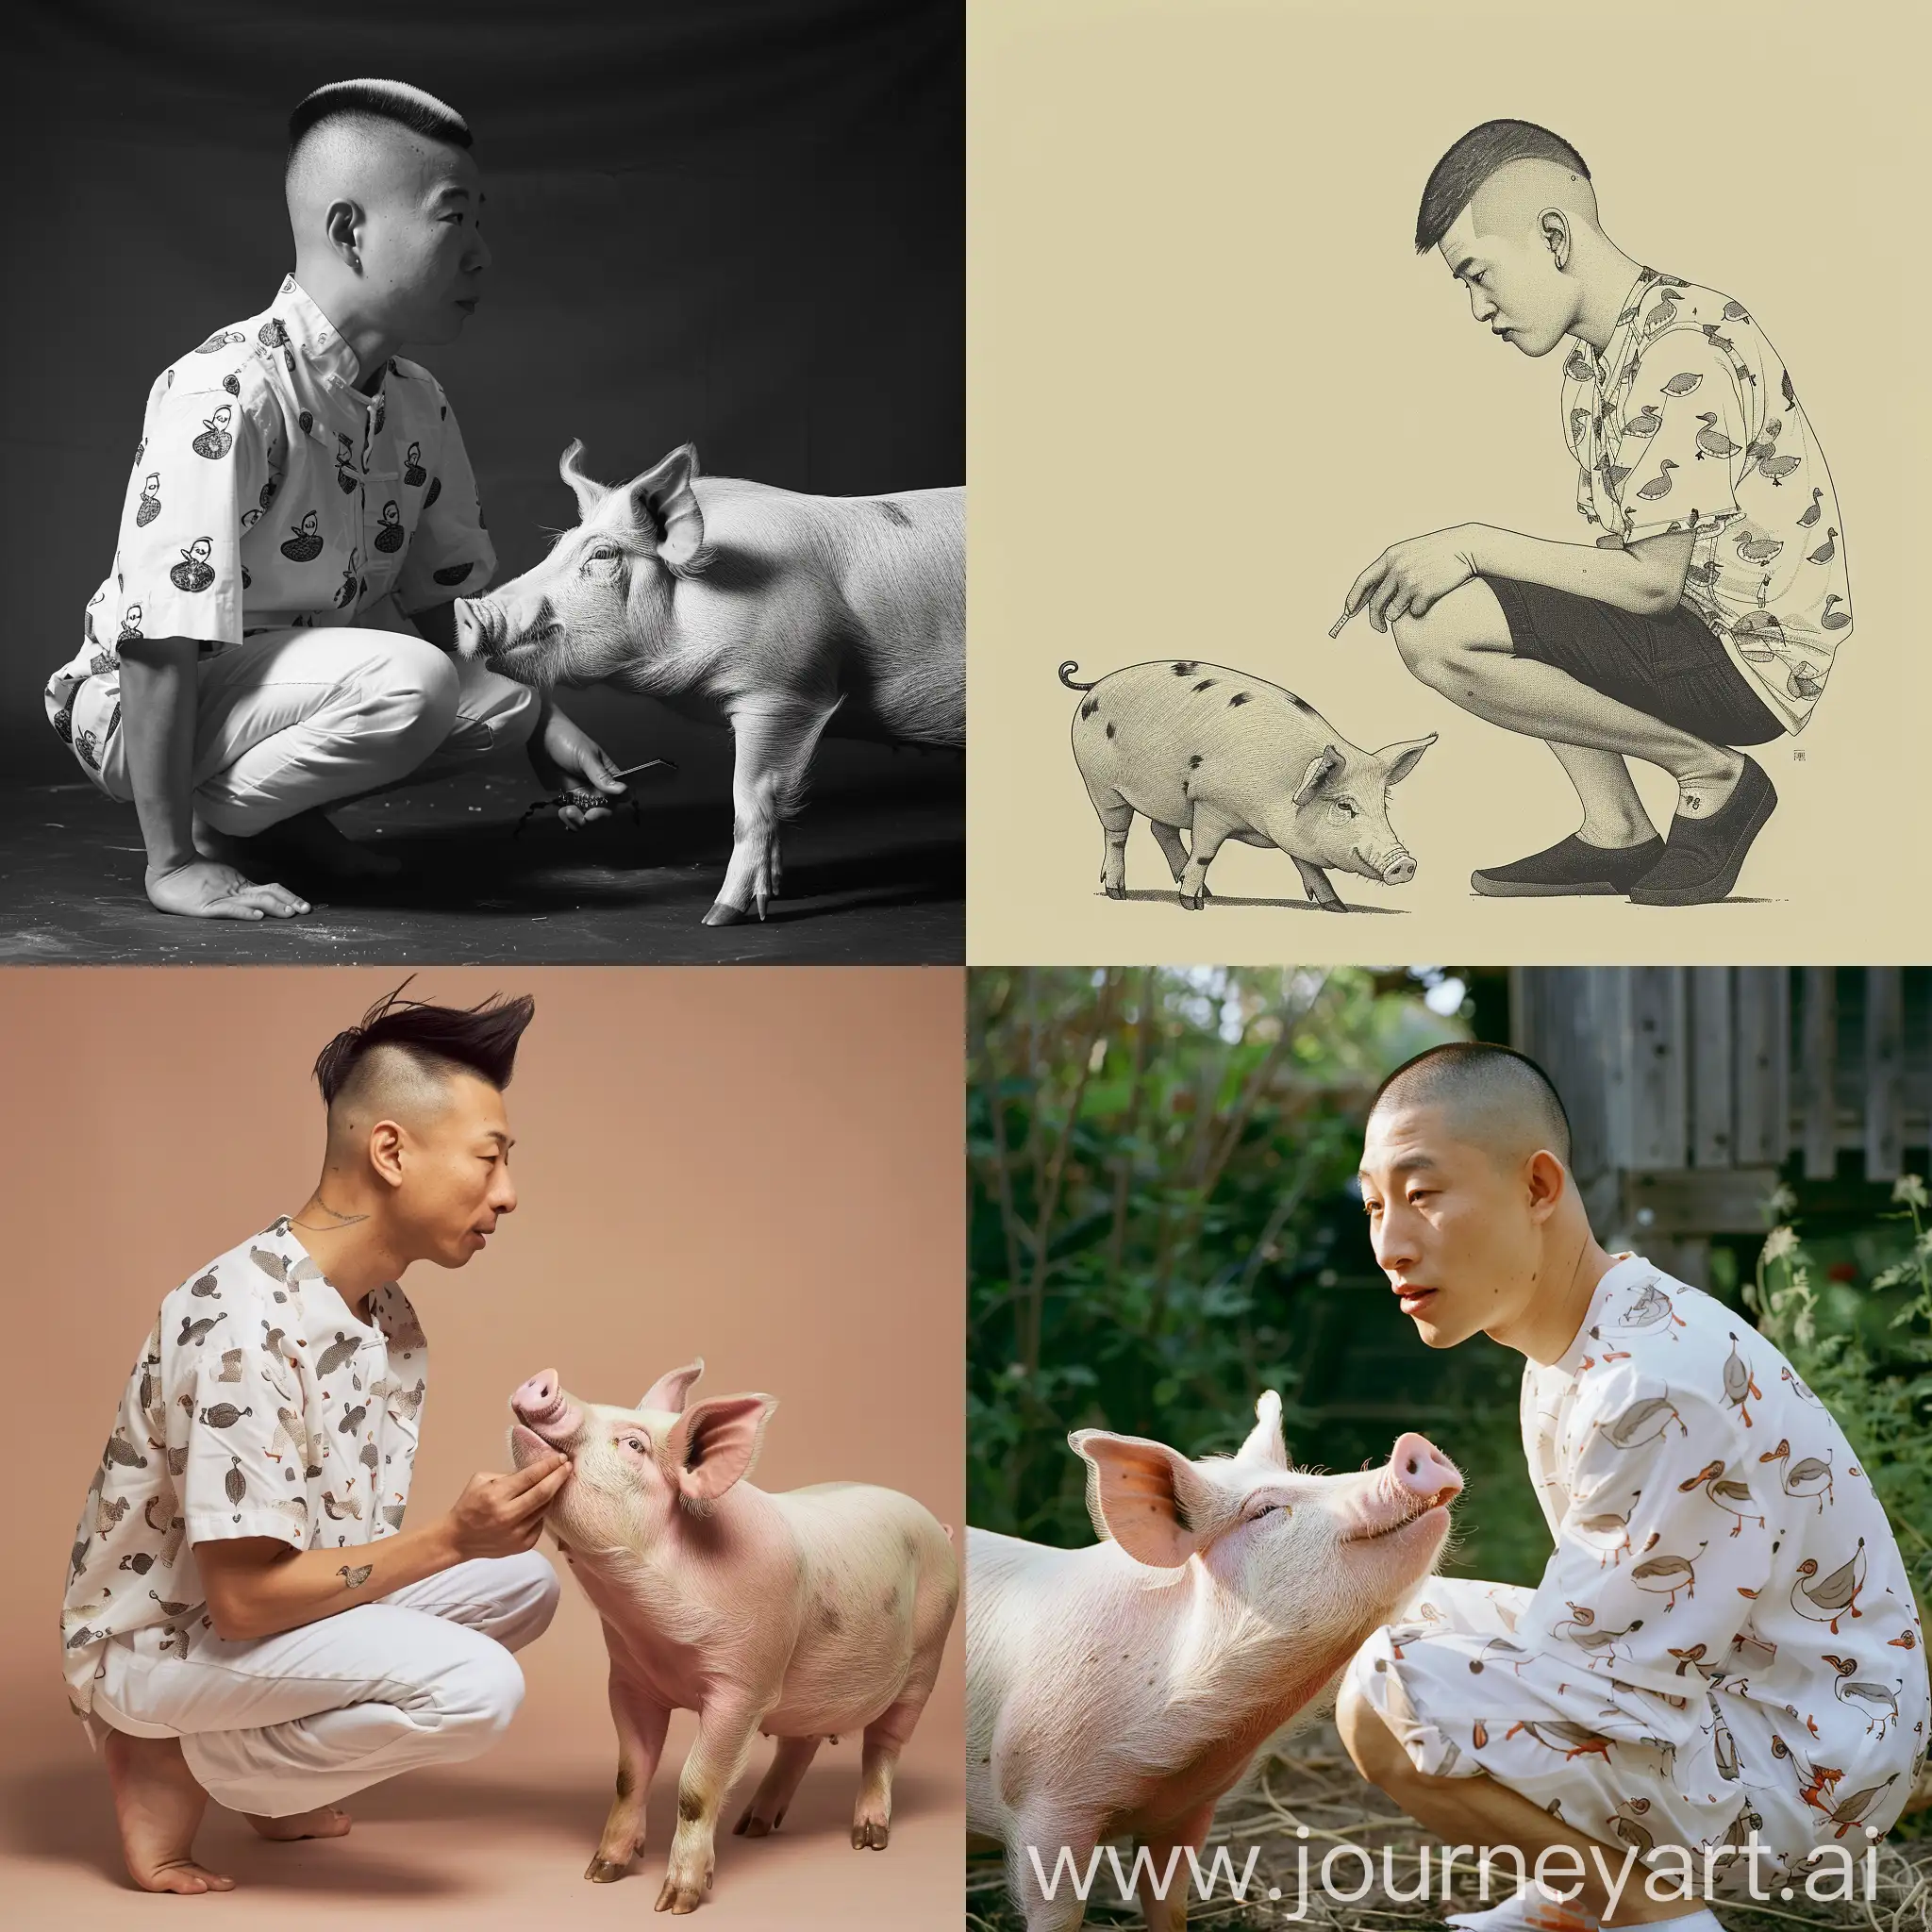 Chinese-Man-Teasing-Pig-in-White-Shirt-with-Duck-Print